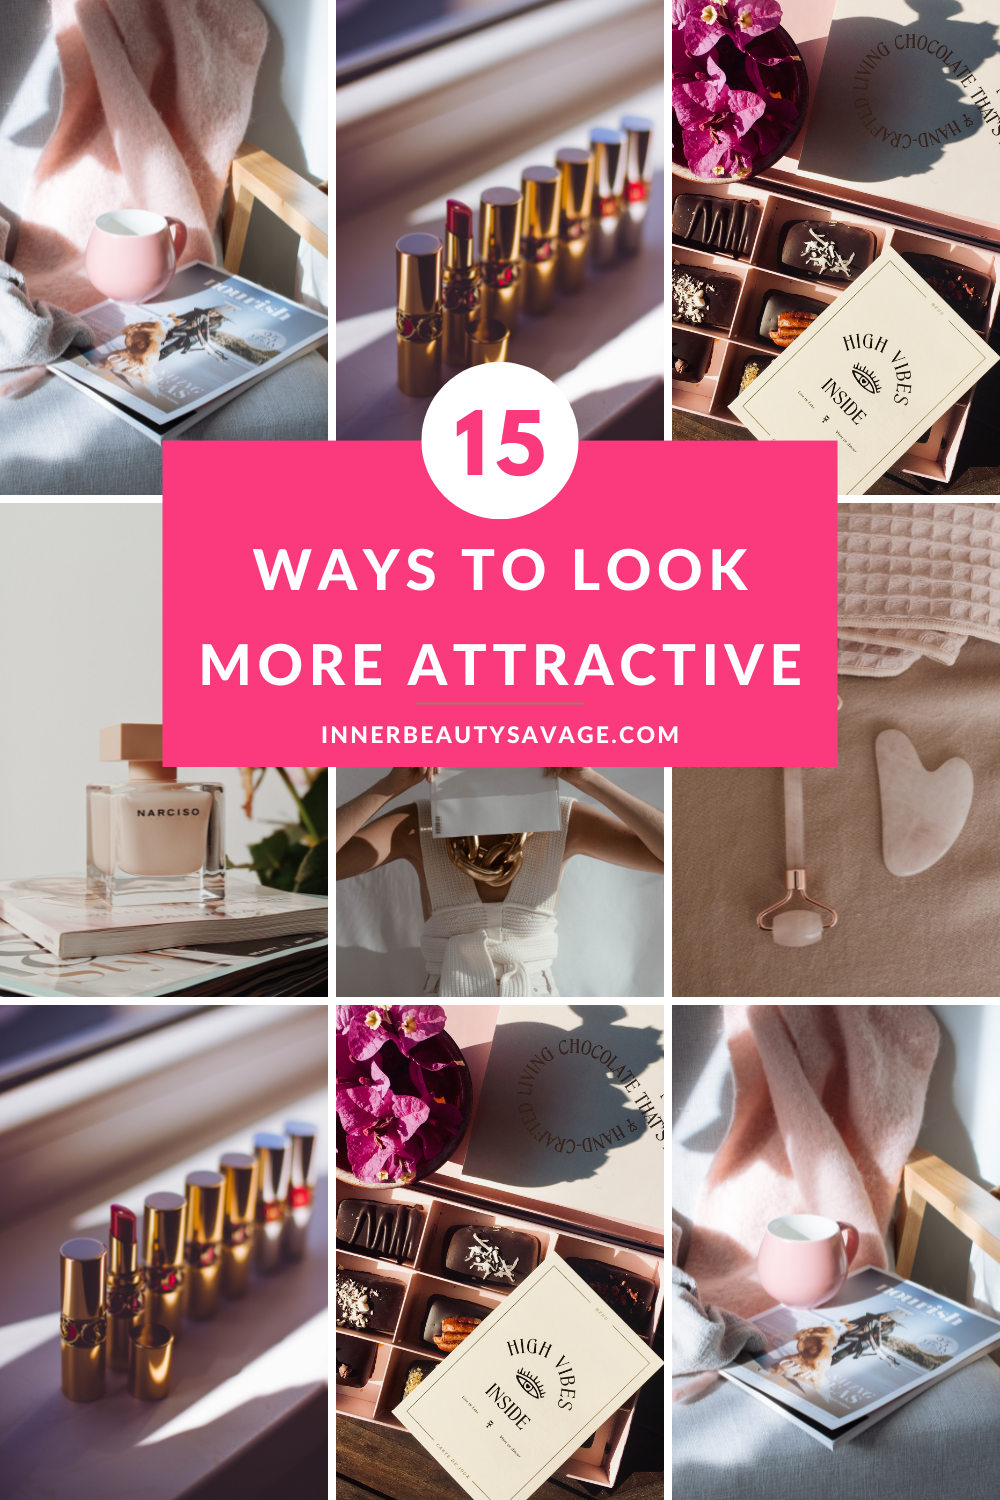 Blog post image on ways to look more attractive